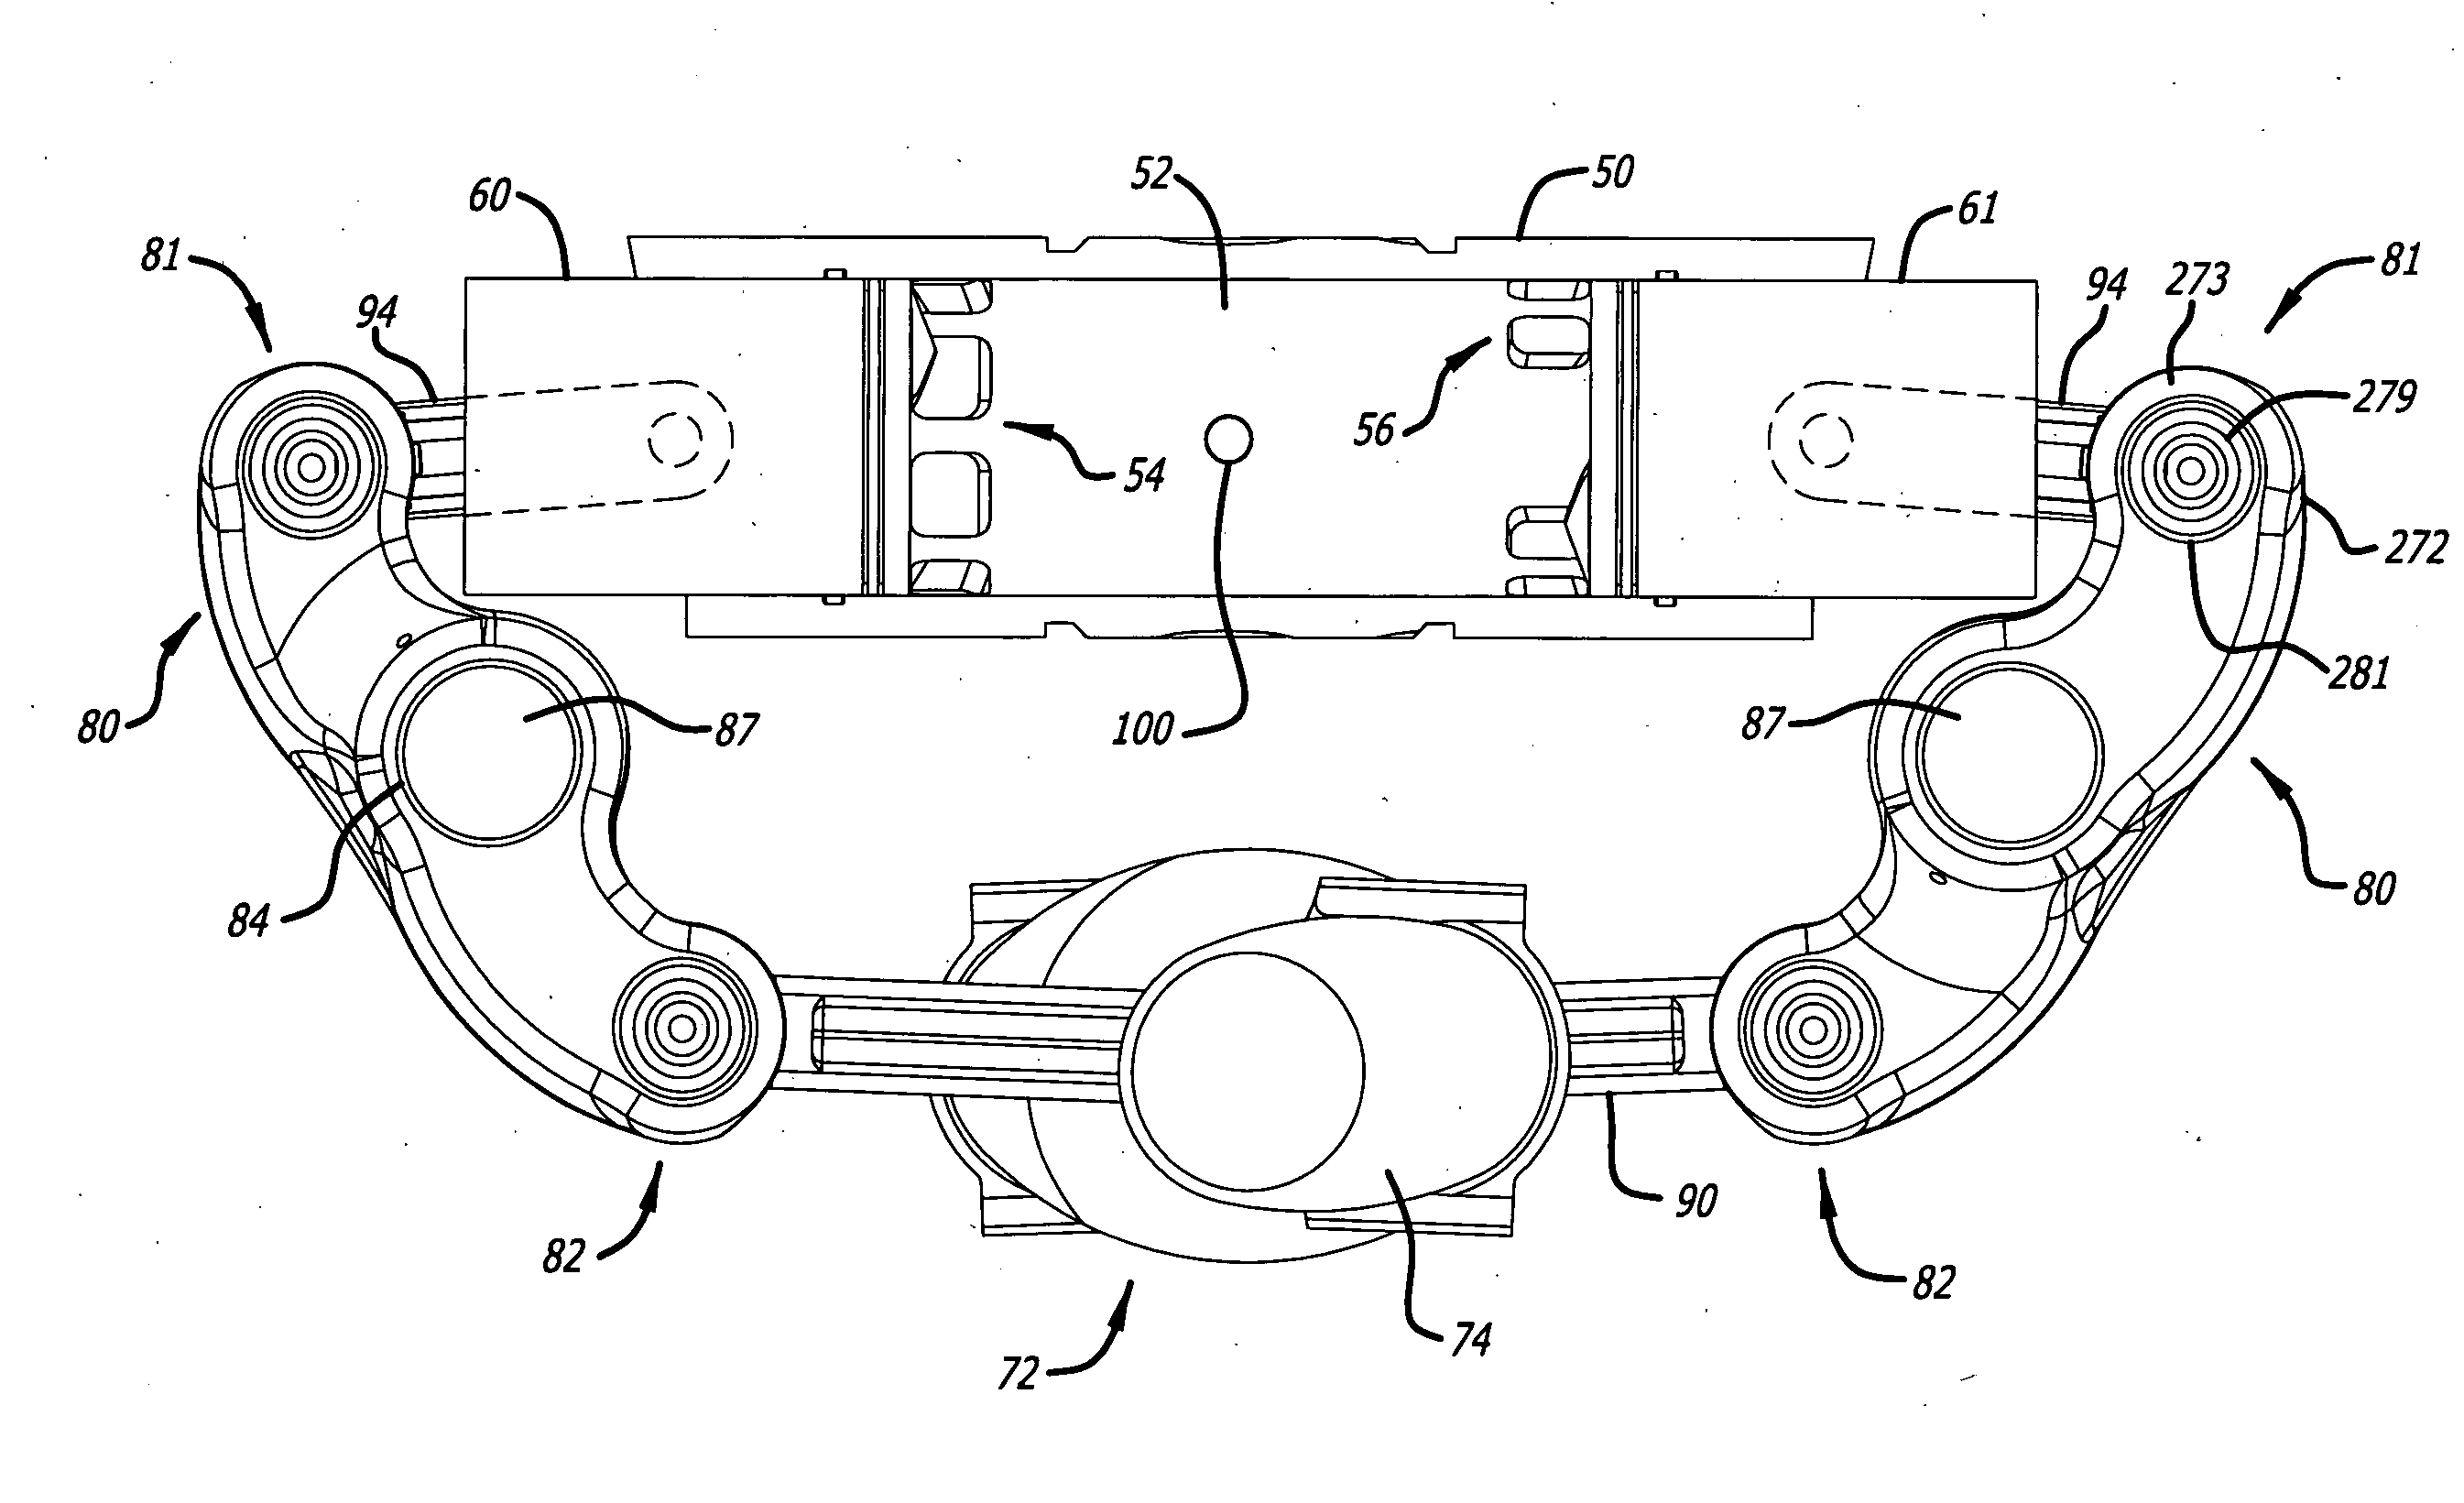 Opposed-piston engine having a single crankshaft coupled to the opposed pistons by linkages with pivoted rocker arms